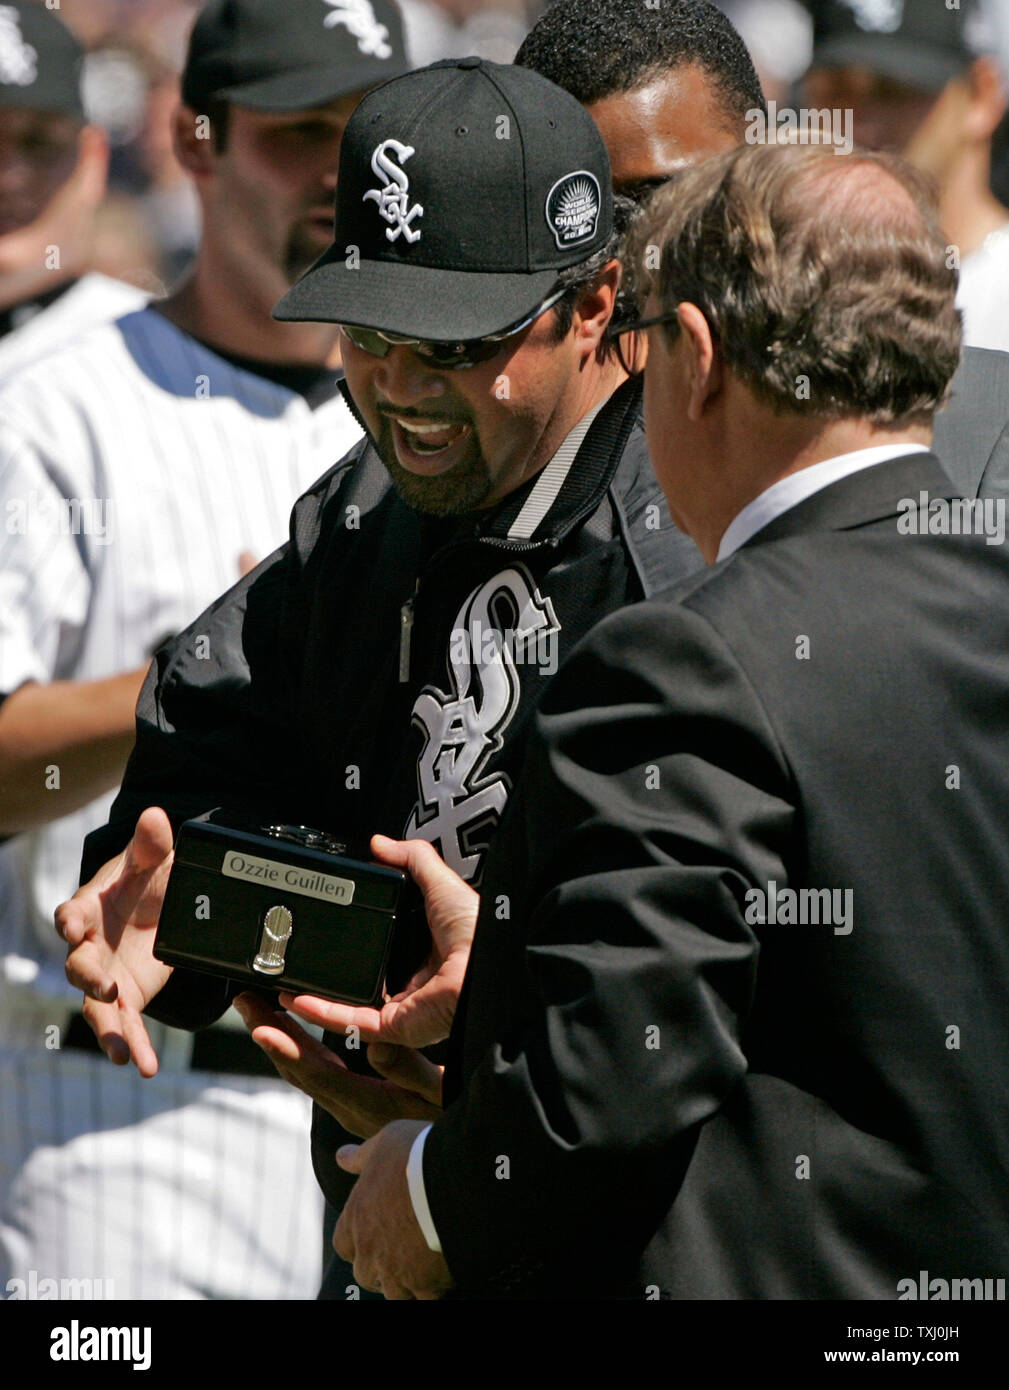 Chicago White Sox manager Ozzie Guillen, left, gets his 2005 World Series  Championship ring from chairman Jerry Reinsdorf before the game against the  Cleveland Indians on April 4, 2006, in Chicago. (UPI